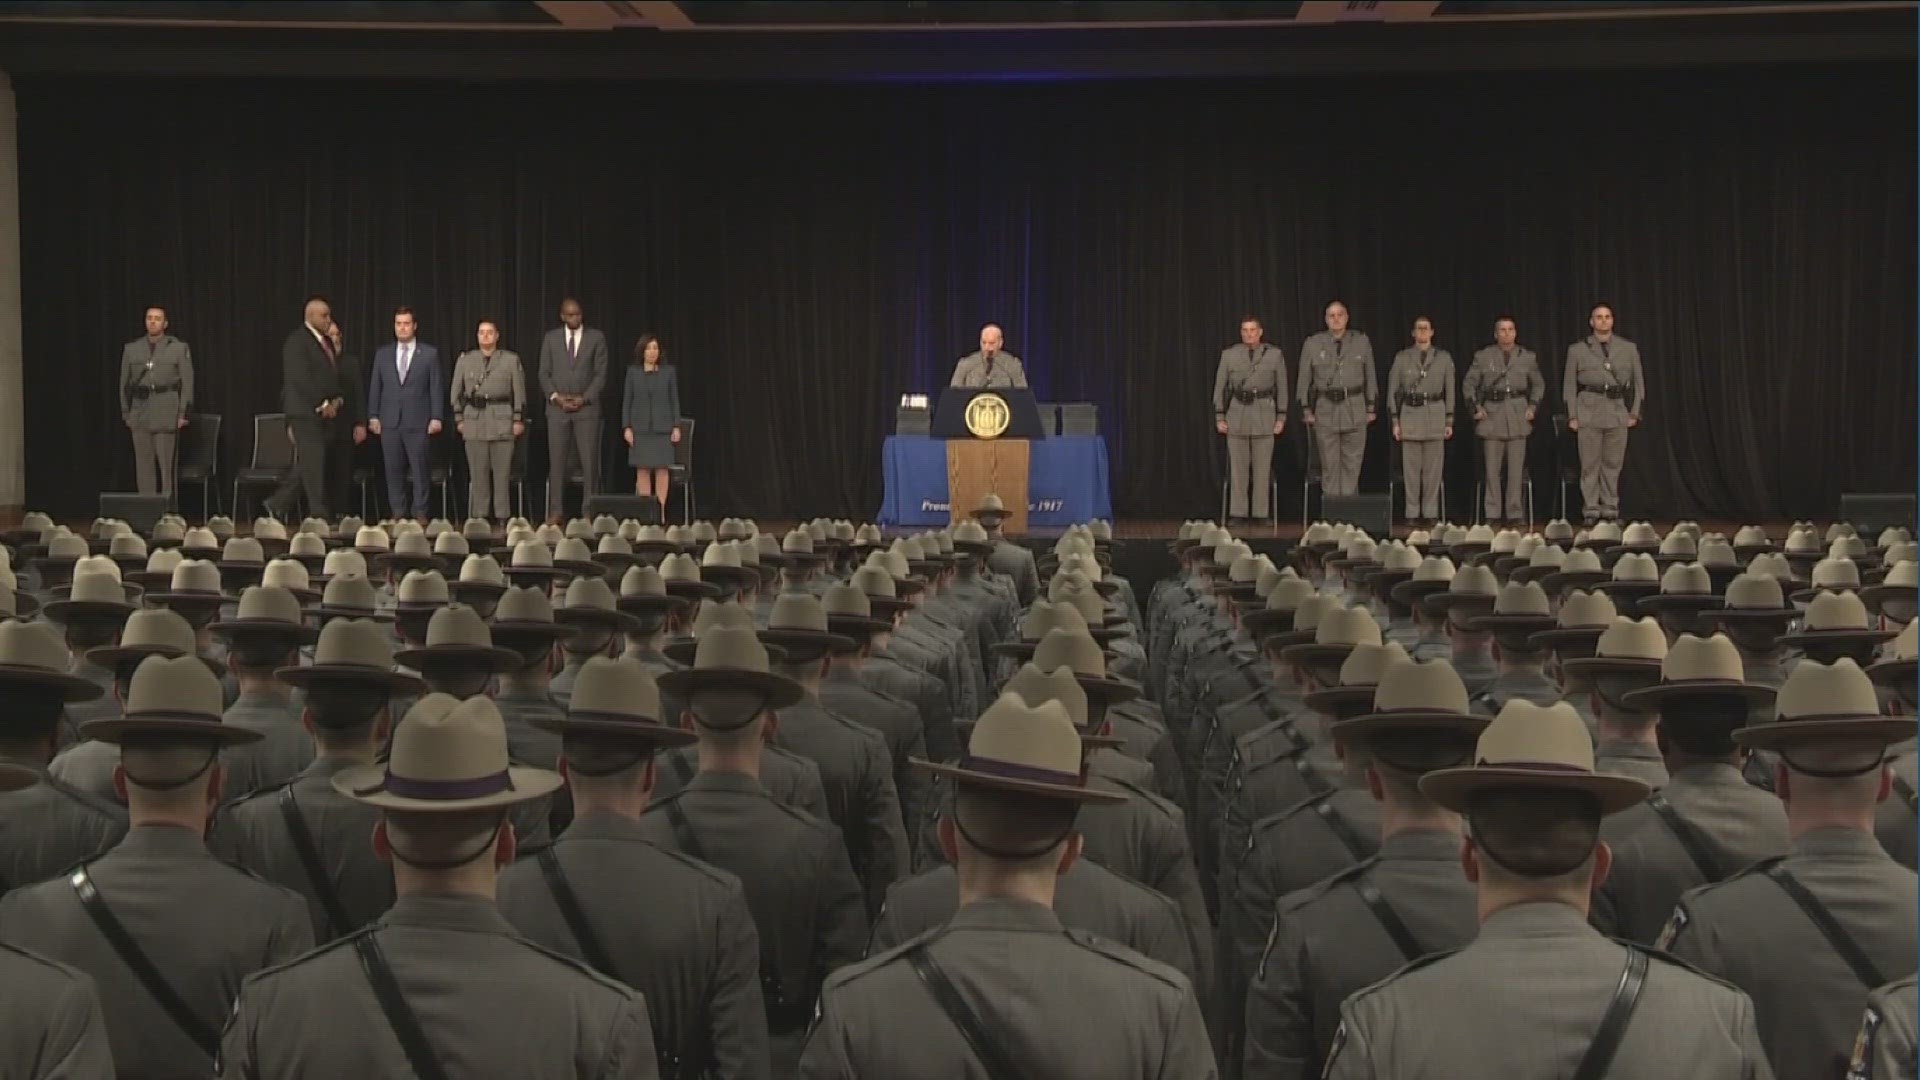 MORE THAN 230 BRAVE MEN AND WOMAN JOINED THE RANKS OF THE NEW YORK STATE POLICE.